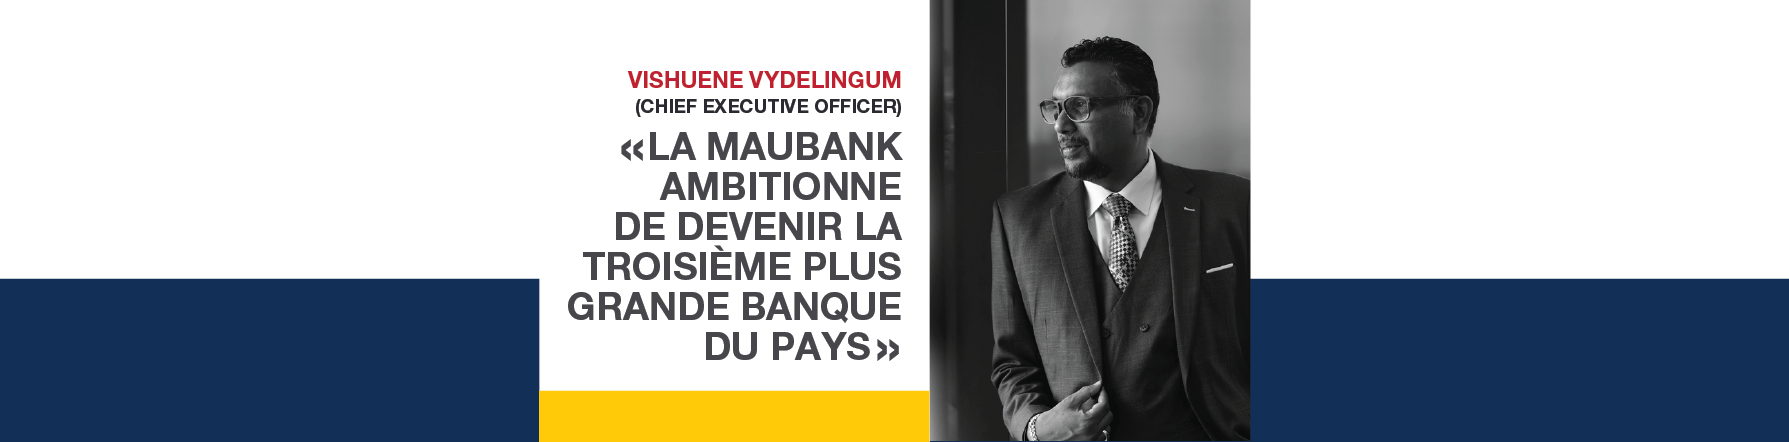 MEDIA RELEASE - The Chief Executive Officer of MauBank, Vishuene Vydelingum firmly affirms to take the bank to new heights!